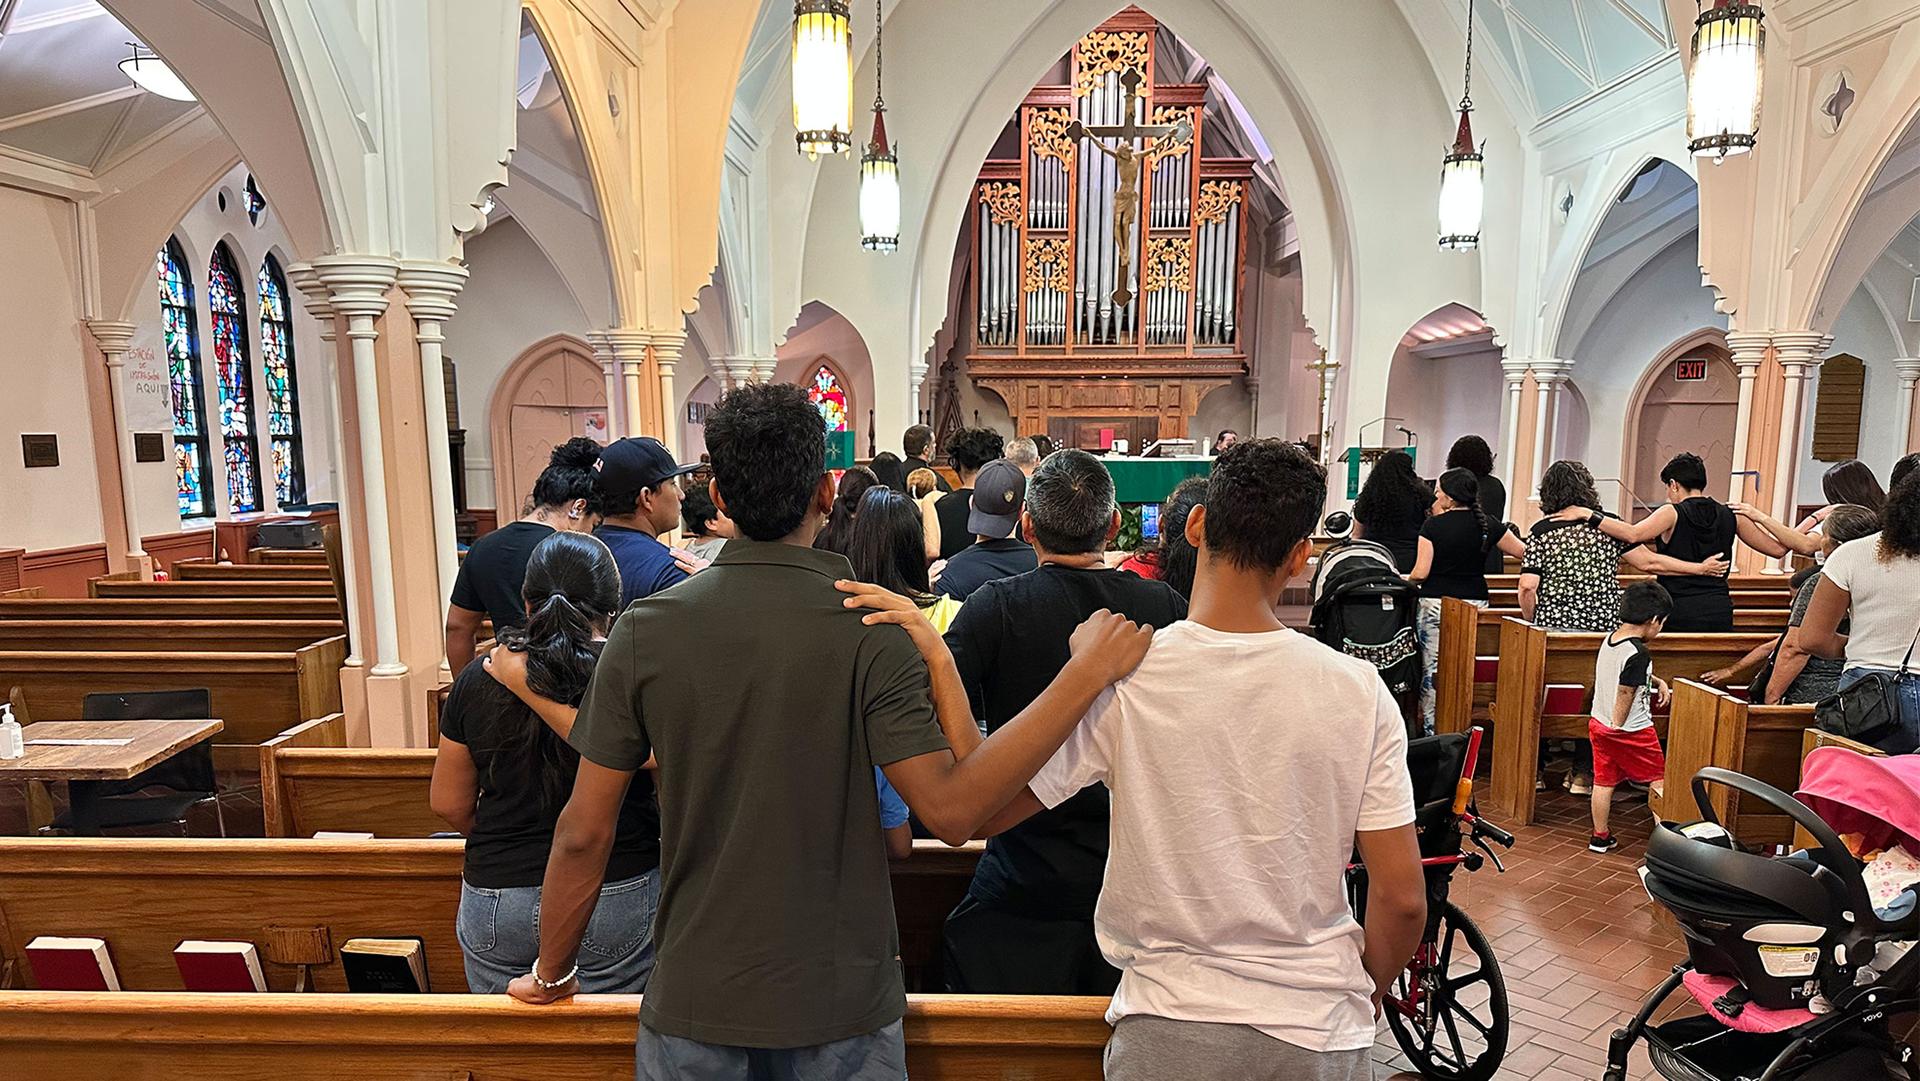 Migrants and asylum seekers attend the Sunday Spanish-language service at The Lutheran Church of the Good Shepherd in Brooklyn, New York.